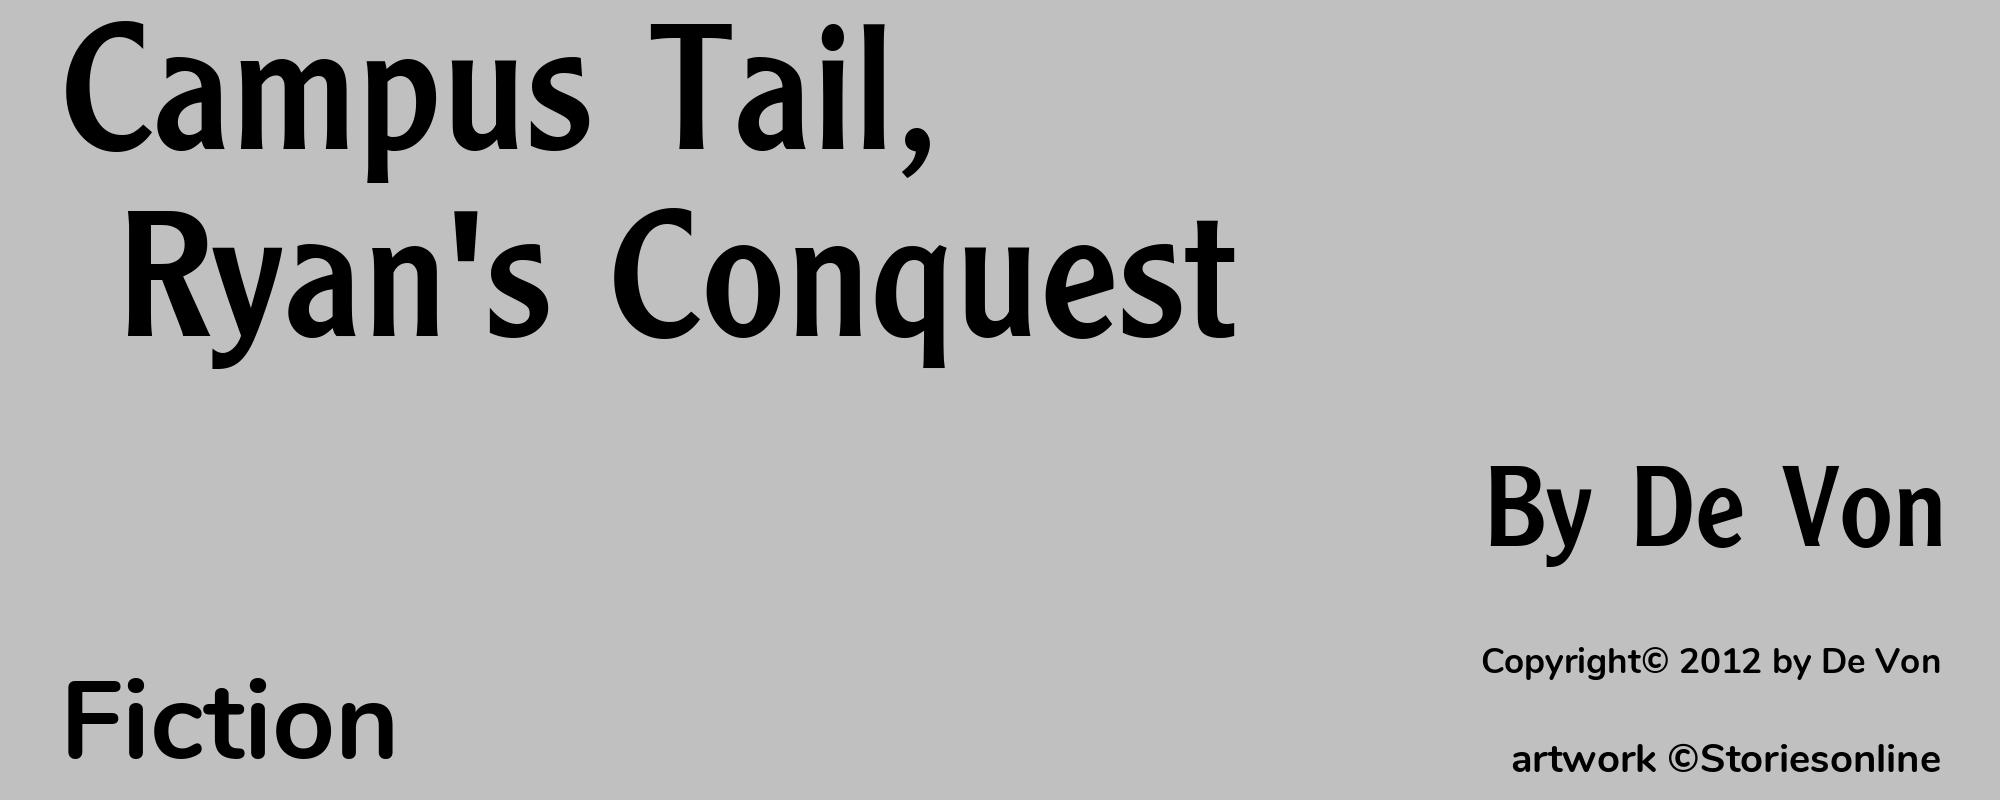 Campus Tail, Ryan's Conquest - Cover